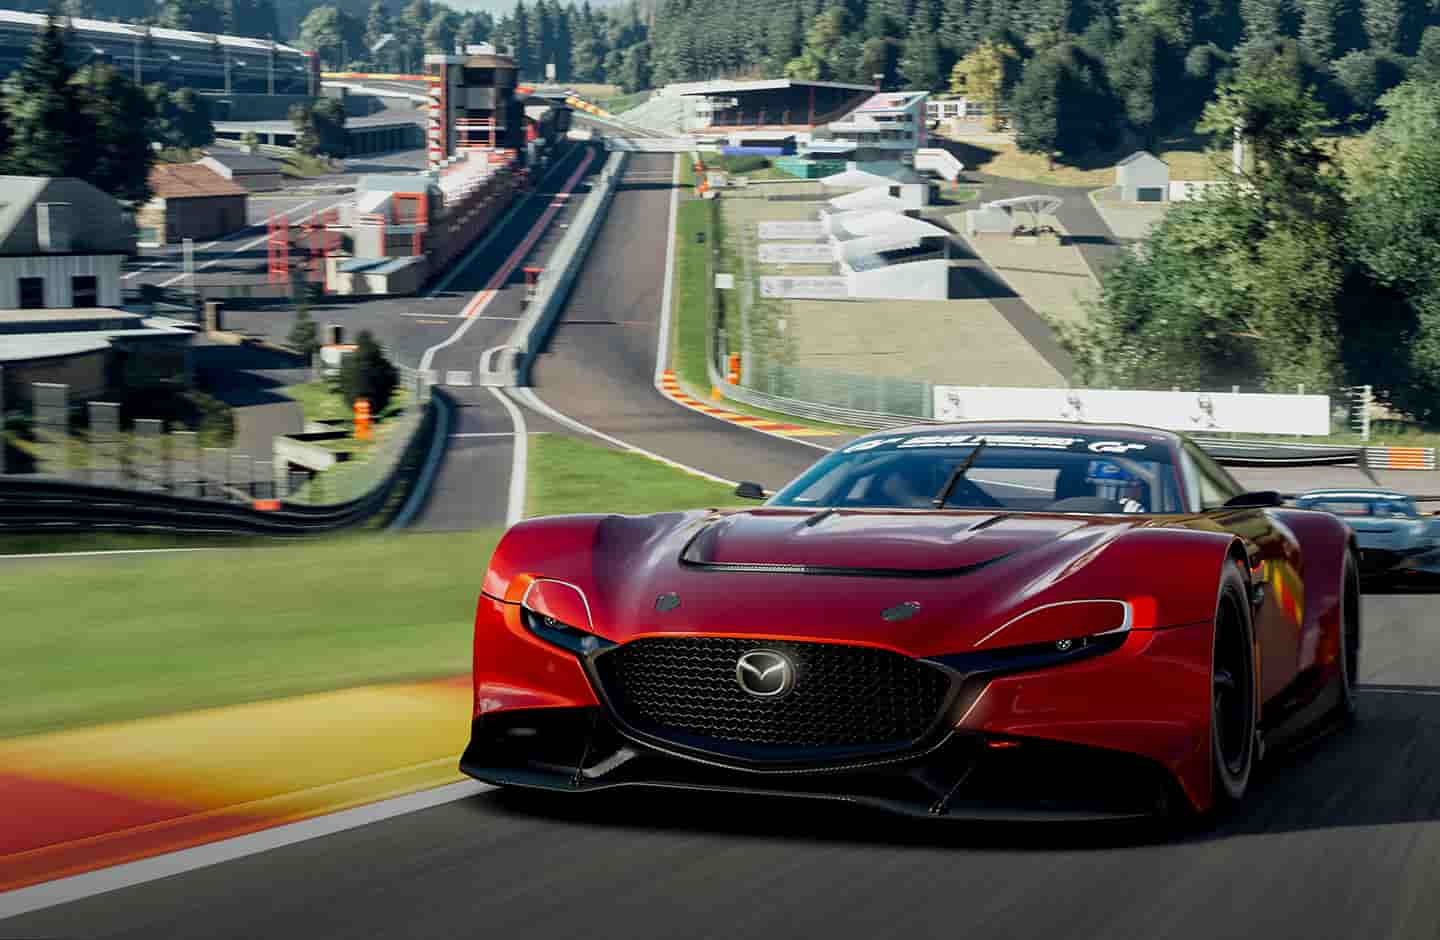 Gran Turismo 7 boss says PS5 game will be 'a full experience' like